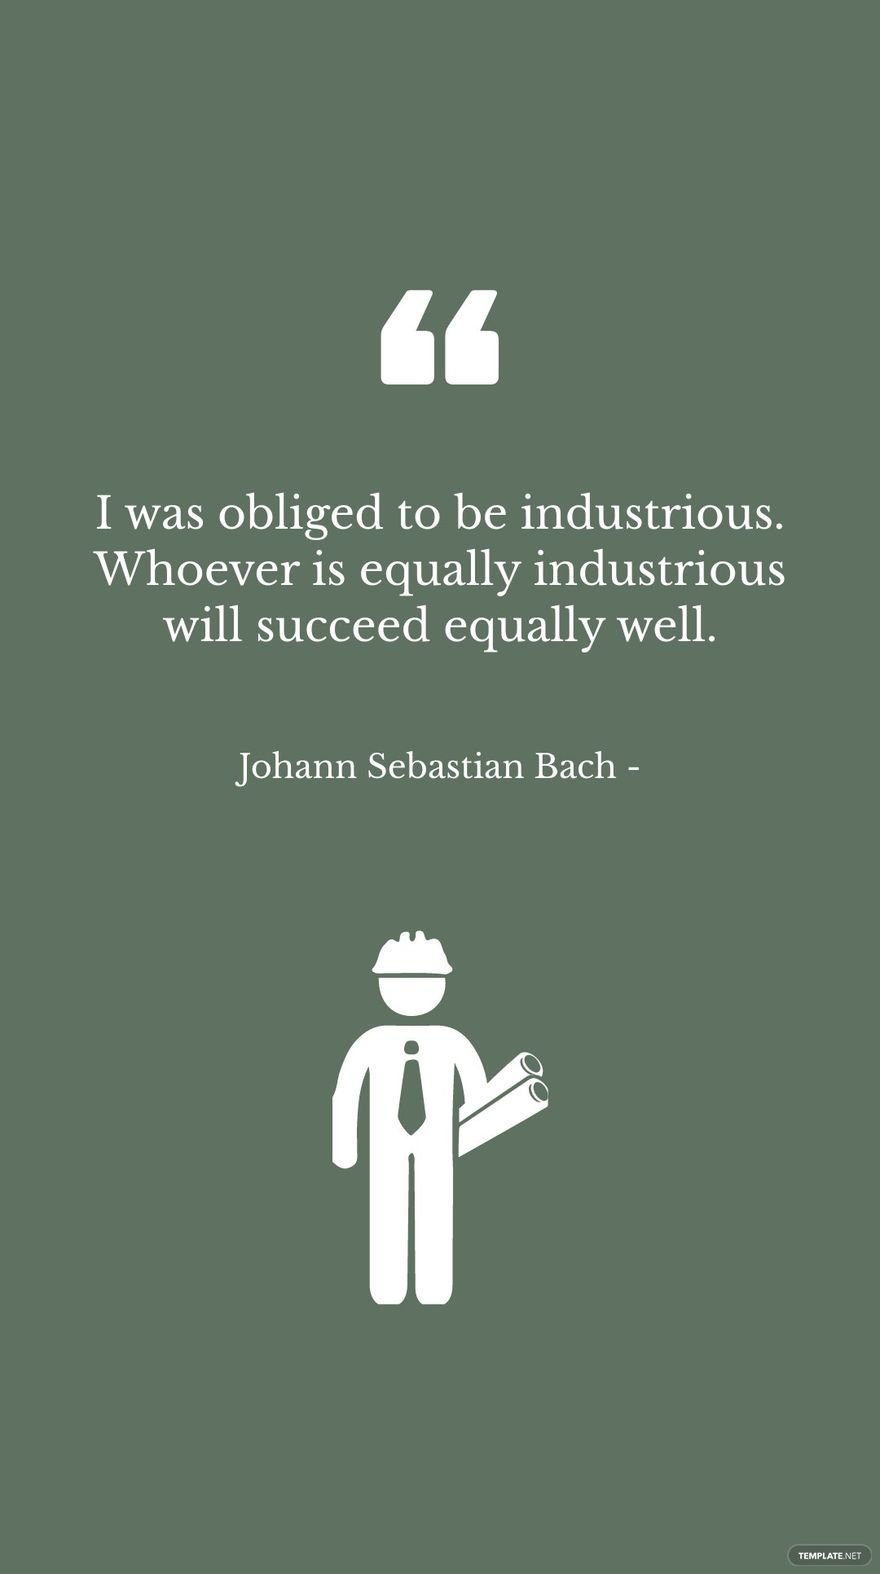 Free Johann Sebastian Bach - I was obliged to be industrious. Whoever is equally industrious will succeed equally well. in JPG